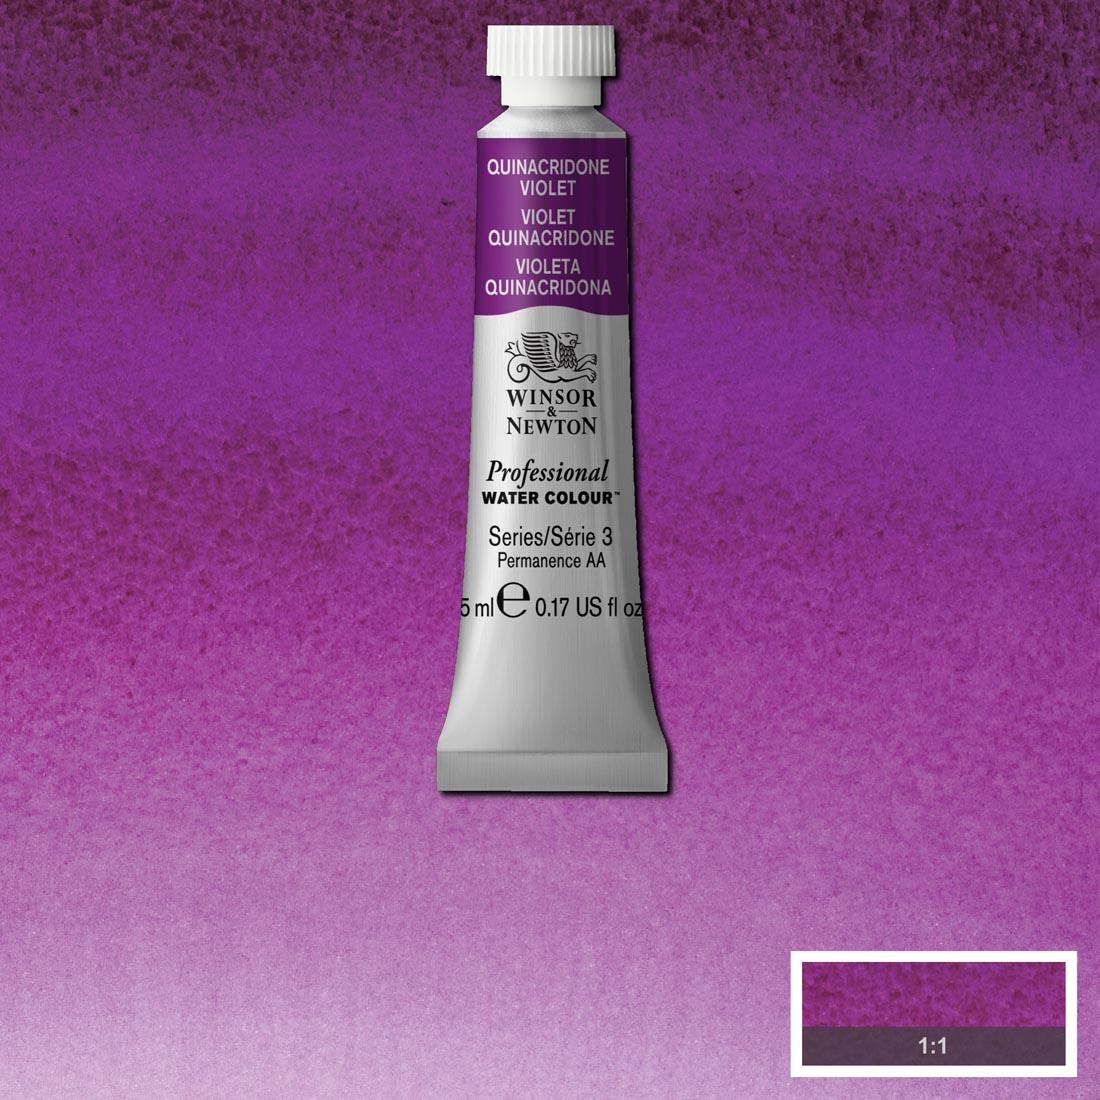 Tube of Quinacridone Violet Winsor & Newton Professional Water Colour with a paint swatch for the background